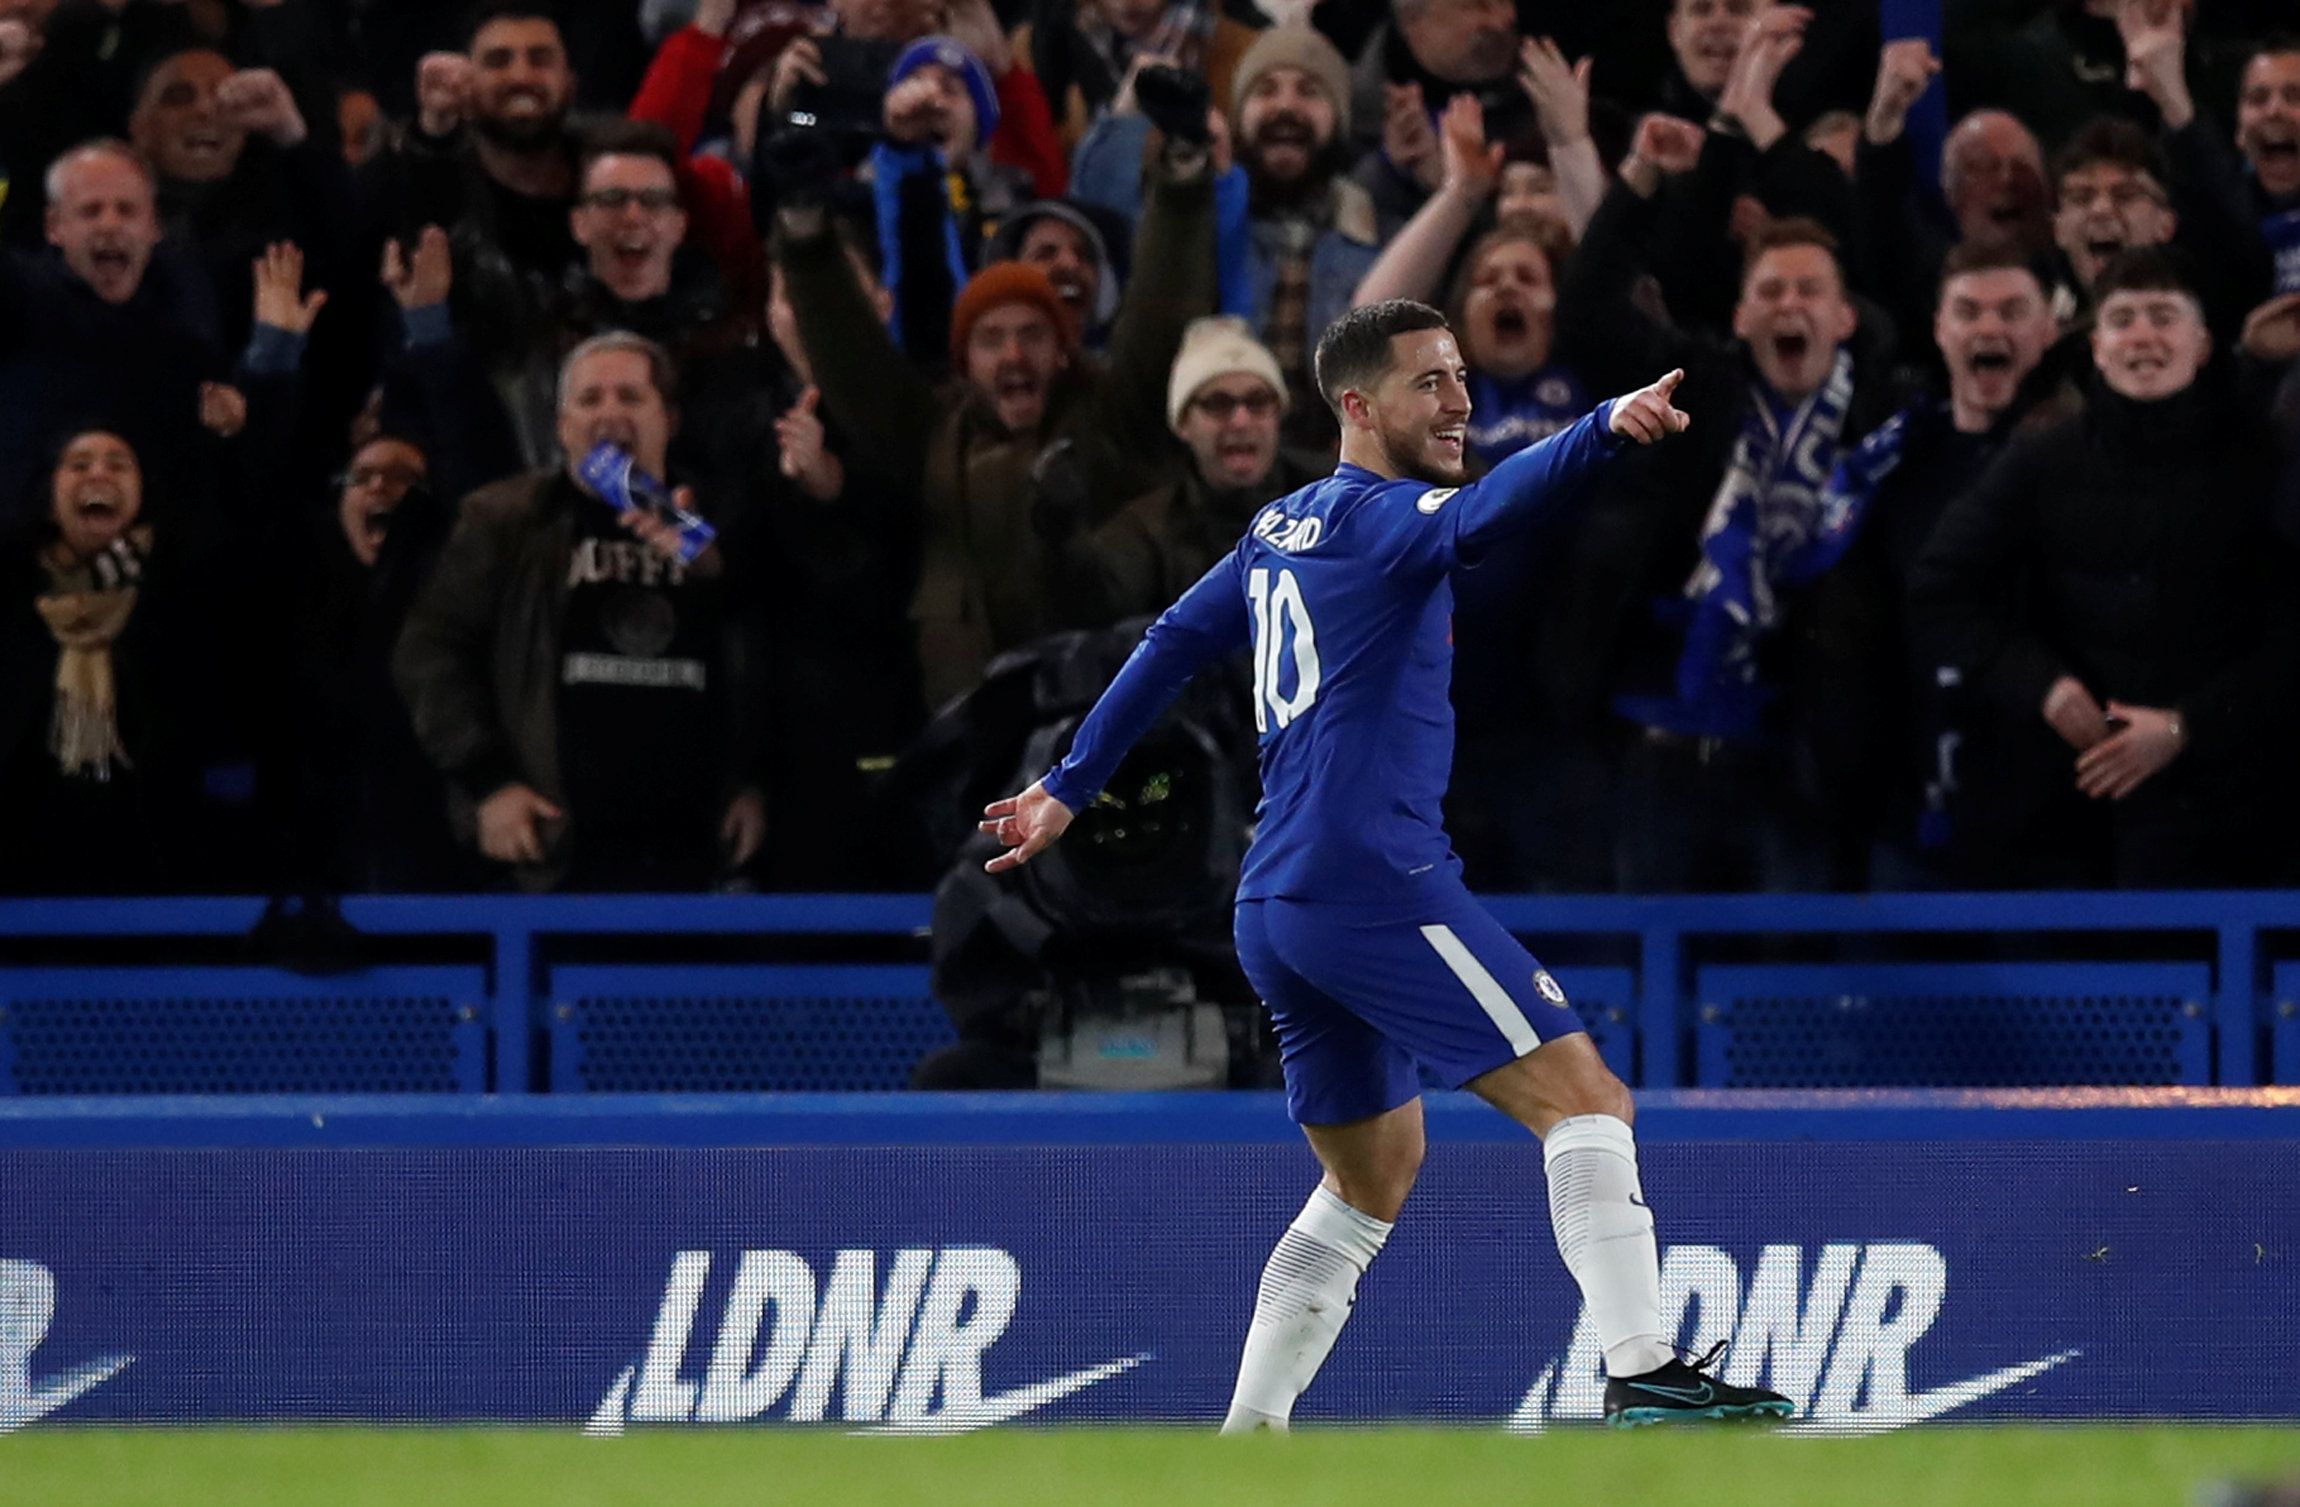 Soccer Football - Premier League - Chelsea vs West Bromwich Albion - Stamford Bridge, London, Britain - February 12, 2018   Chelsea's Eden Hazard celebrates scoring their first goal   REUTERS/Eddie Keogh    EDITORIAL USE ONLY. No use with unauthorized audio, video, data, fixture lists, club/league logos or 